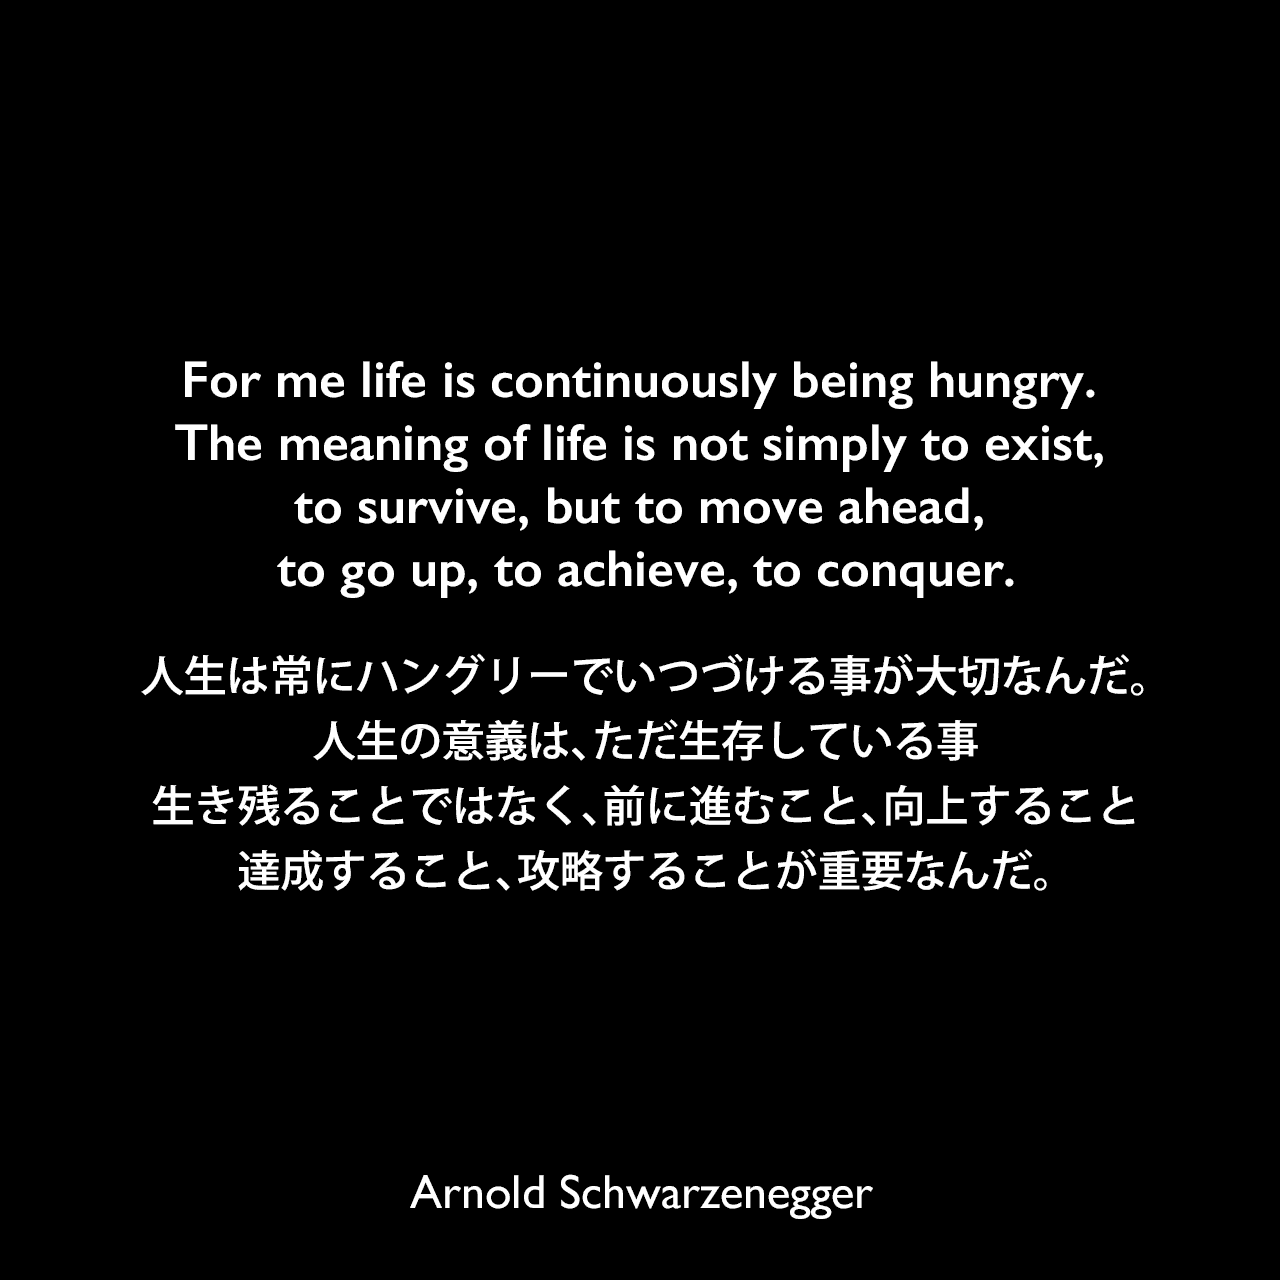 For me life is continuously being hungry. The meaning of life is not simply to exist, to survive, but to move ahead, to go up, to achieve, to conquer.人生は常にハングリーでいつづける事が大切なんだ。人生の意義は、ただ生存している事、生き残ることではなく、前に進むこと、向上すること、達成すること、攻略することが重要なんだ。Arnold Schwarzenegger